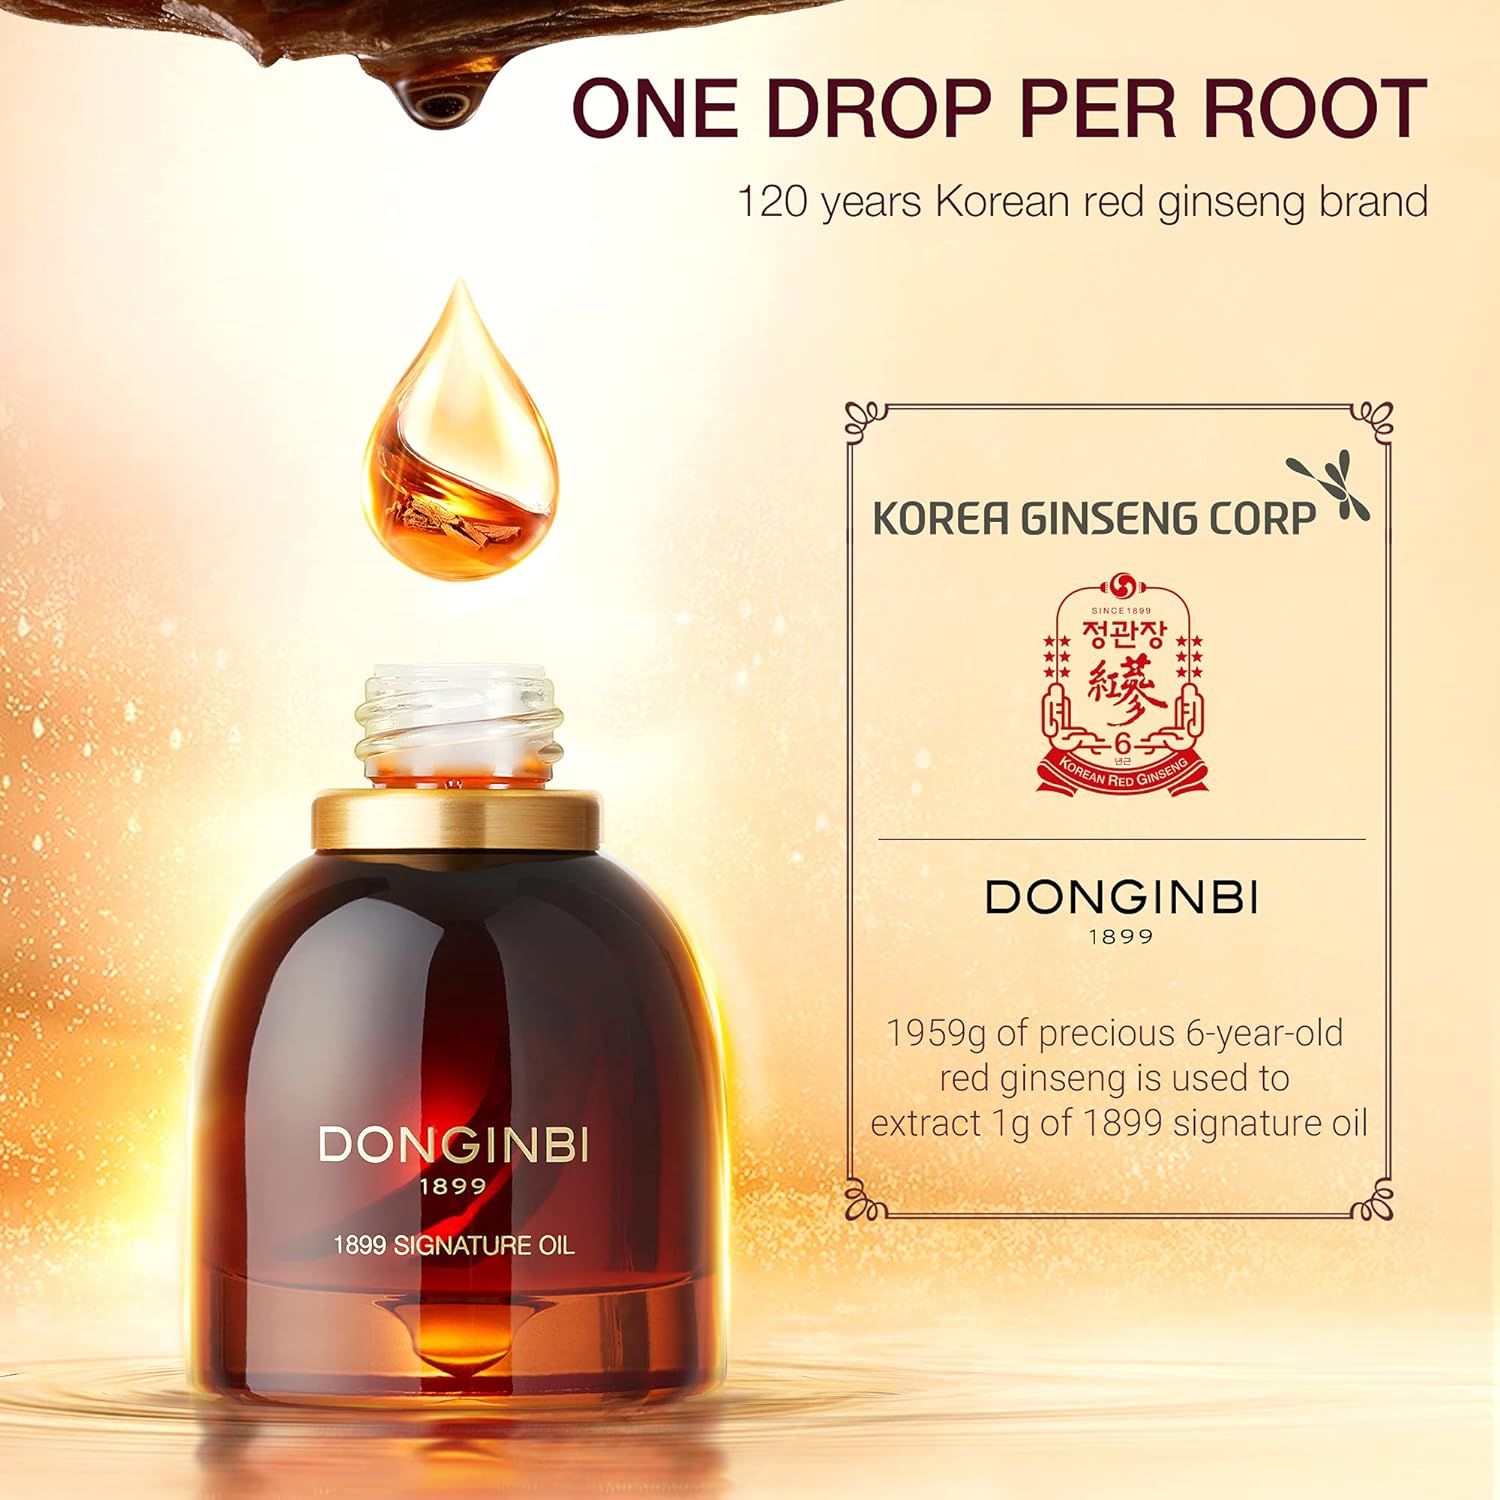 The image shows a bottle of DONGINBI 1899 Signature Oil with a droplet of oil above it. Text reads, "ONE DROP PER ROOT," "120 years Korean red ginseng brand," and "1959g of precious 6-year-old red ginseng is used to extract 1g of 1899 signature oil." A logo for Korea Ginseng Corp is also displayed.